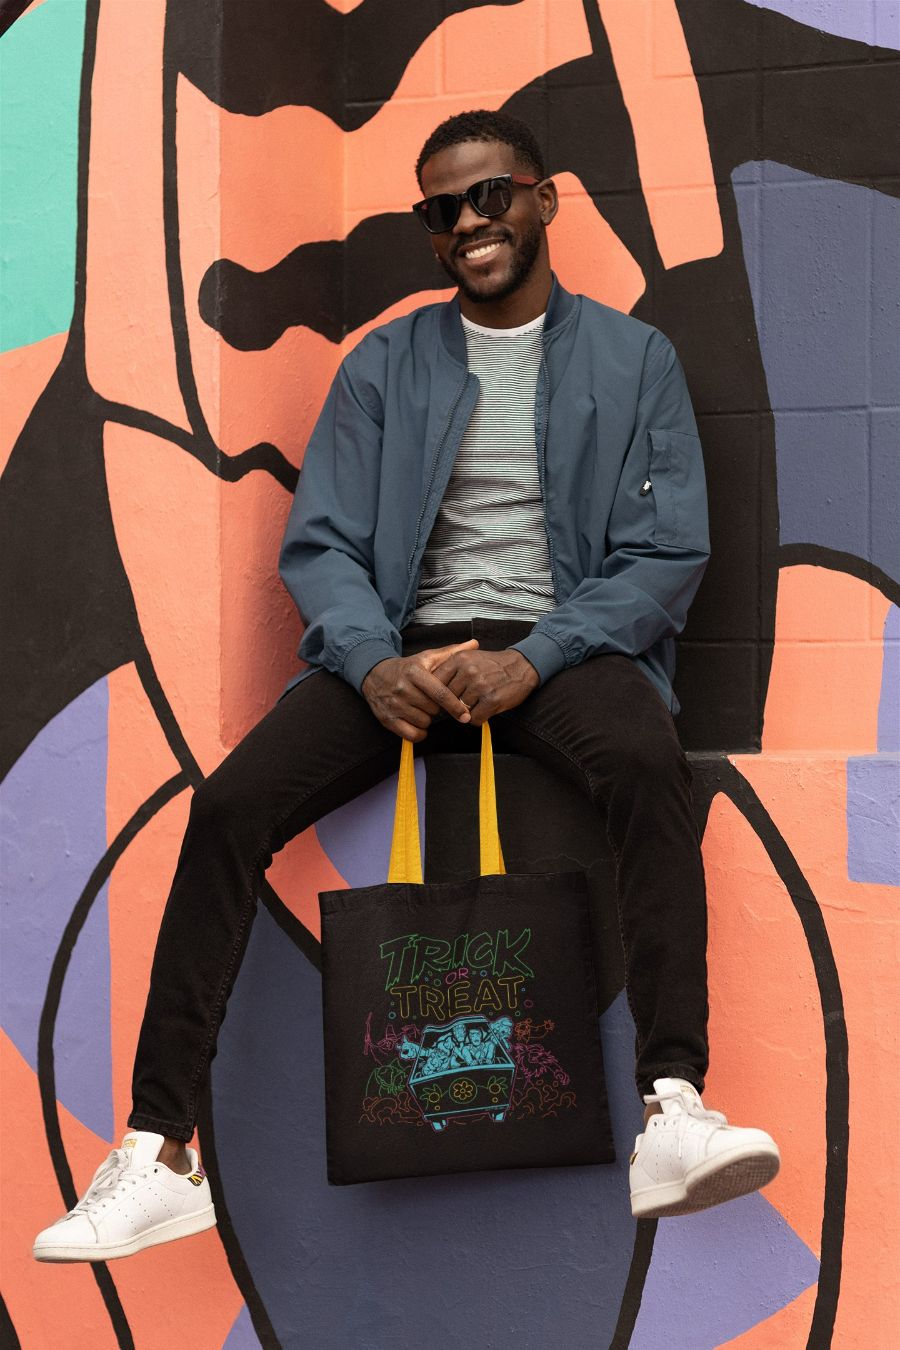 SD-Scoobtober_tote-bag-mockup-featuring-a-cheerful-man-posing-behind-a-colorful-wall-m28701